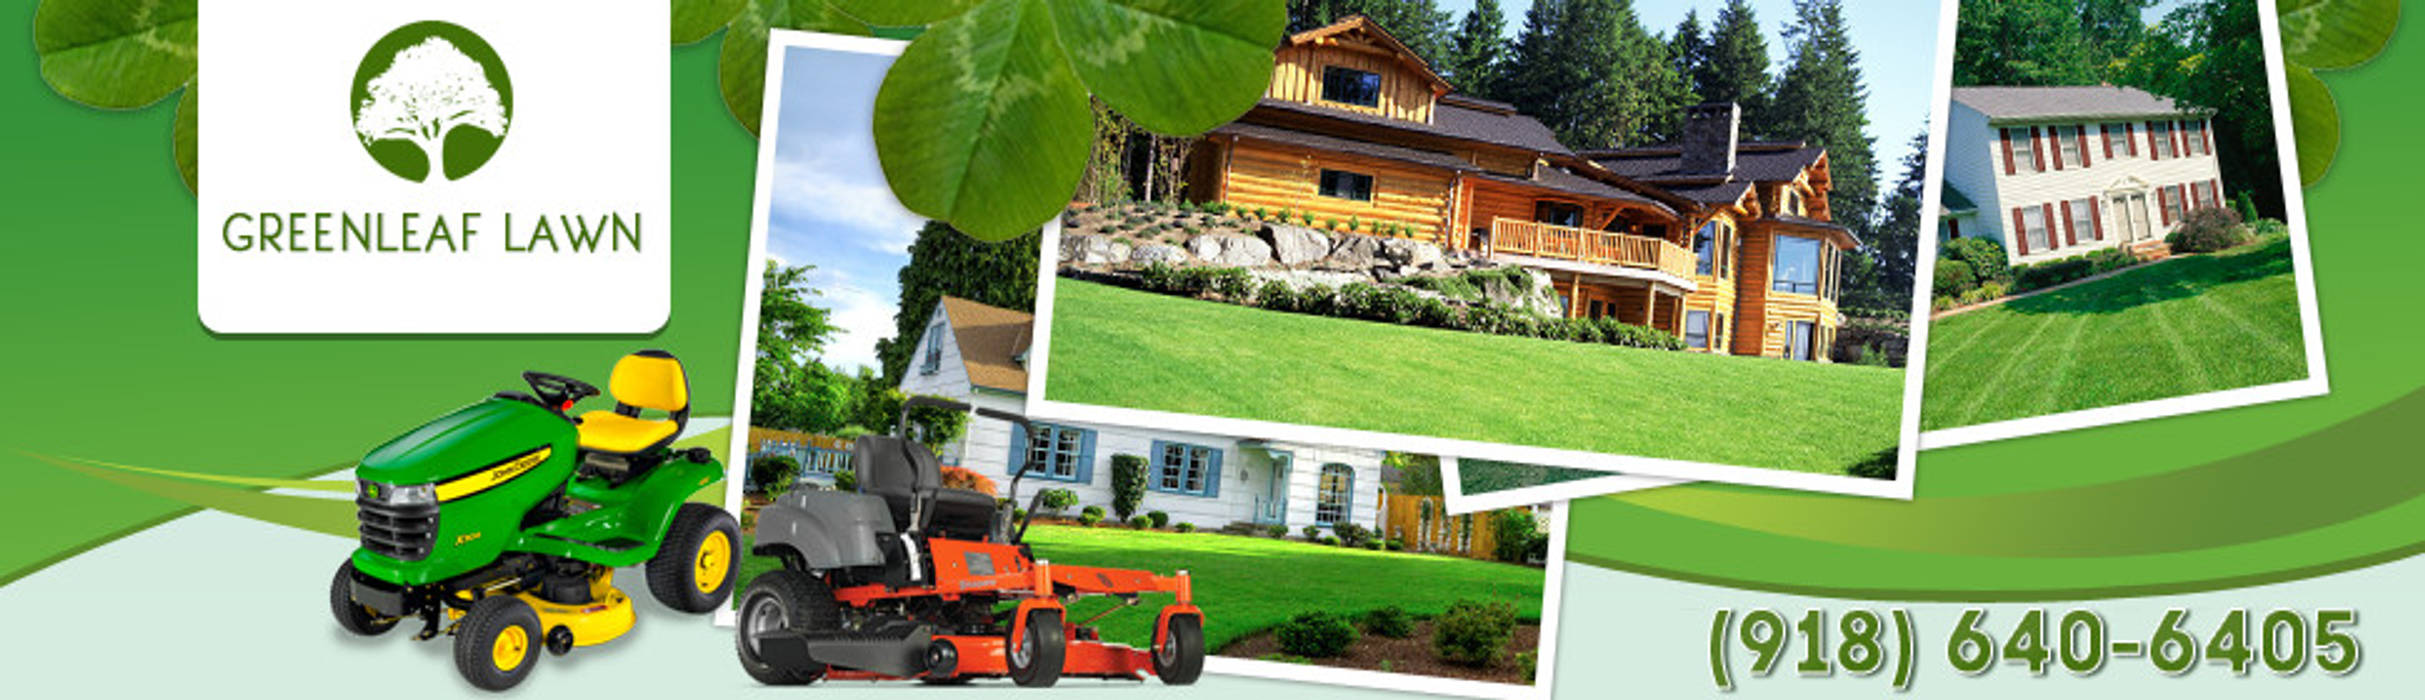 Main Reasons To Get Professional Lawn Care Services, Real Estate Real Estate Klassische Häuser